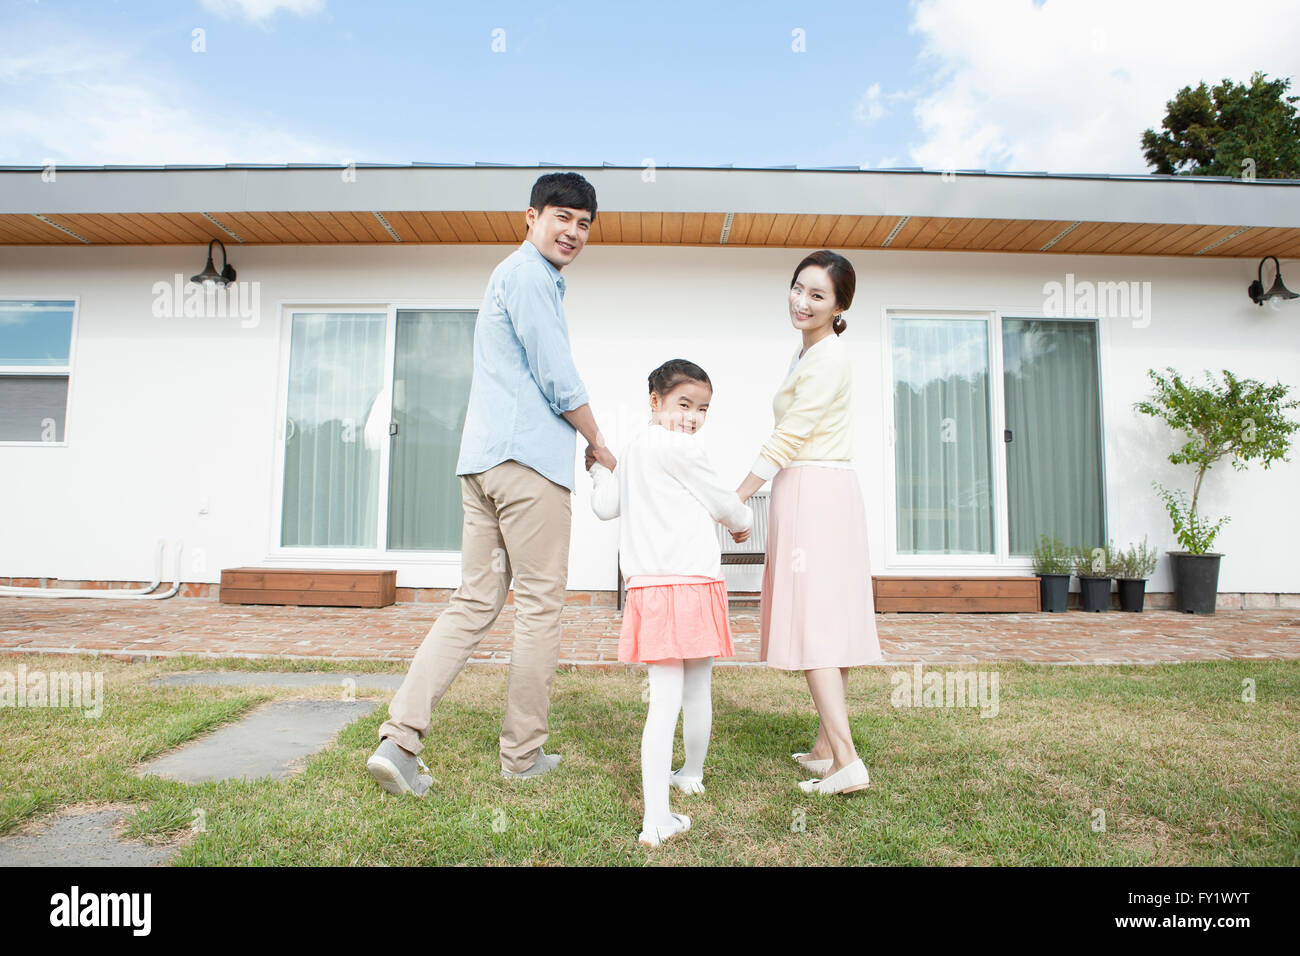 Back appearance of a family looking back and walking at the yard of their house representing rural living Stock Photo